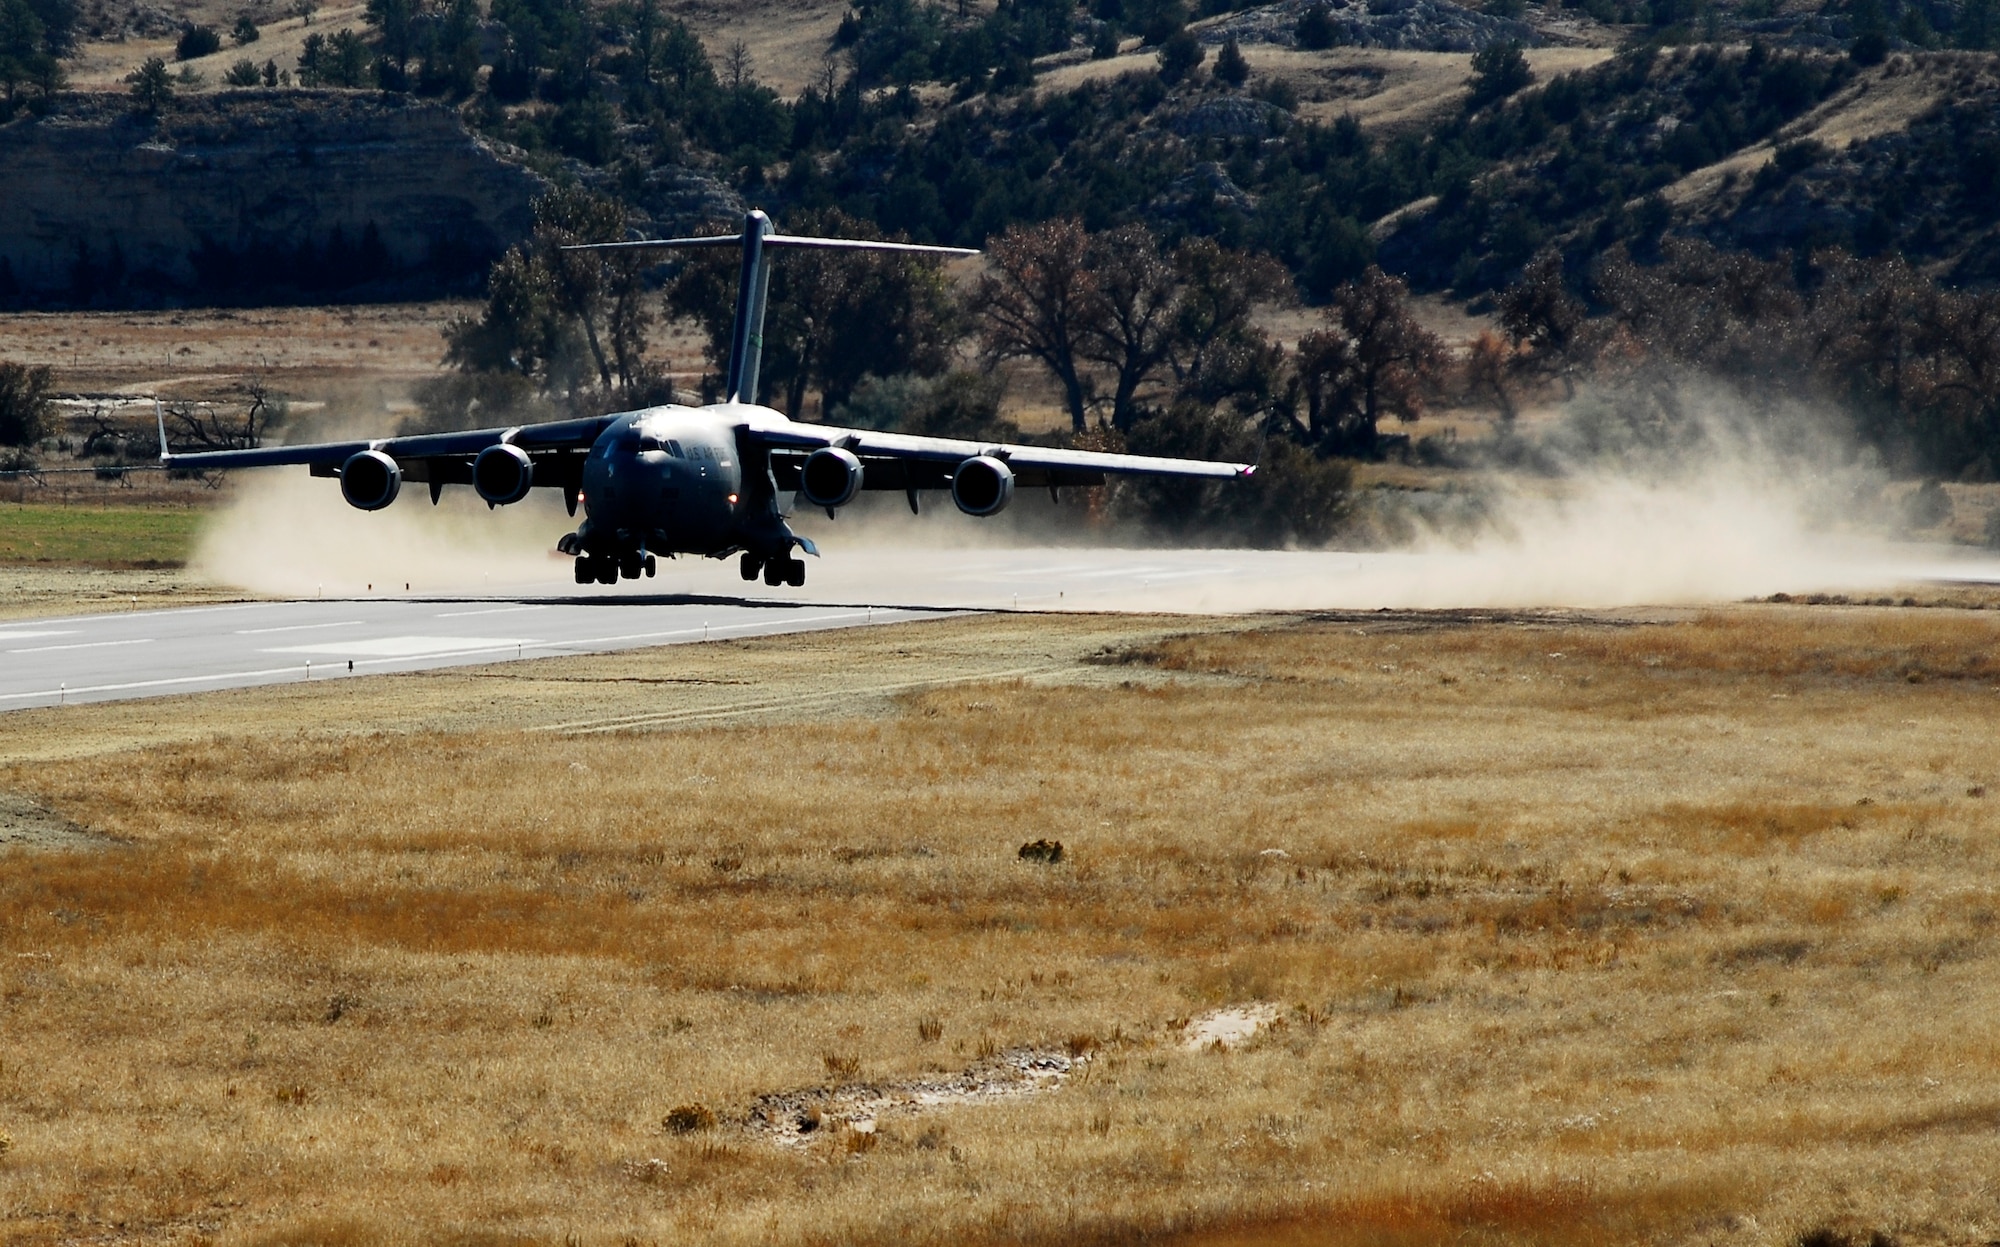 A C-17 Globemaster III aircraft from McChord lands at the Wyoming National Guard's Guernsey Army Airfield at Camp Guernsey in Guernsey, Wyo., during the official opening of an updated airstrip capable of handling the massive cargo aircraft. The airstrip is now capable of supporting up to 20 fixed-wing aircraft as well as three C-17's. In addition to the civilian/military air strip, Camp Guernsey also boasts nearly 70,000 acres of terrain and supports approximately 65 square miles of restricted air space up to 30,000 feet. (Photo by Brandon Quester/Public Affairs Specialist/Wyoming National Guard).